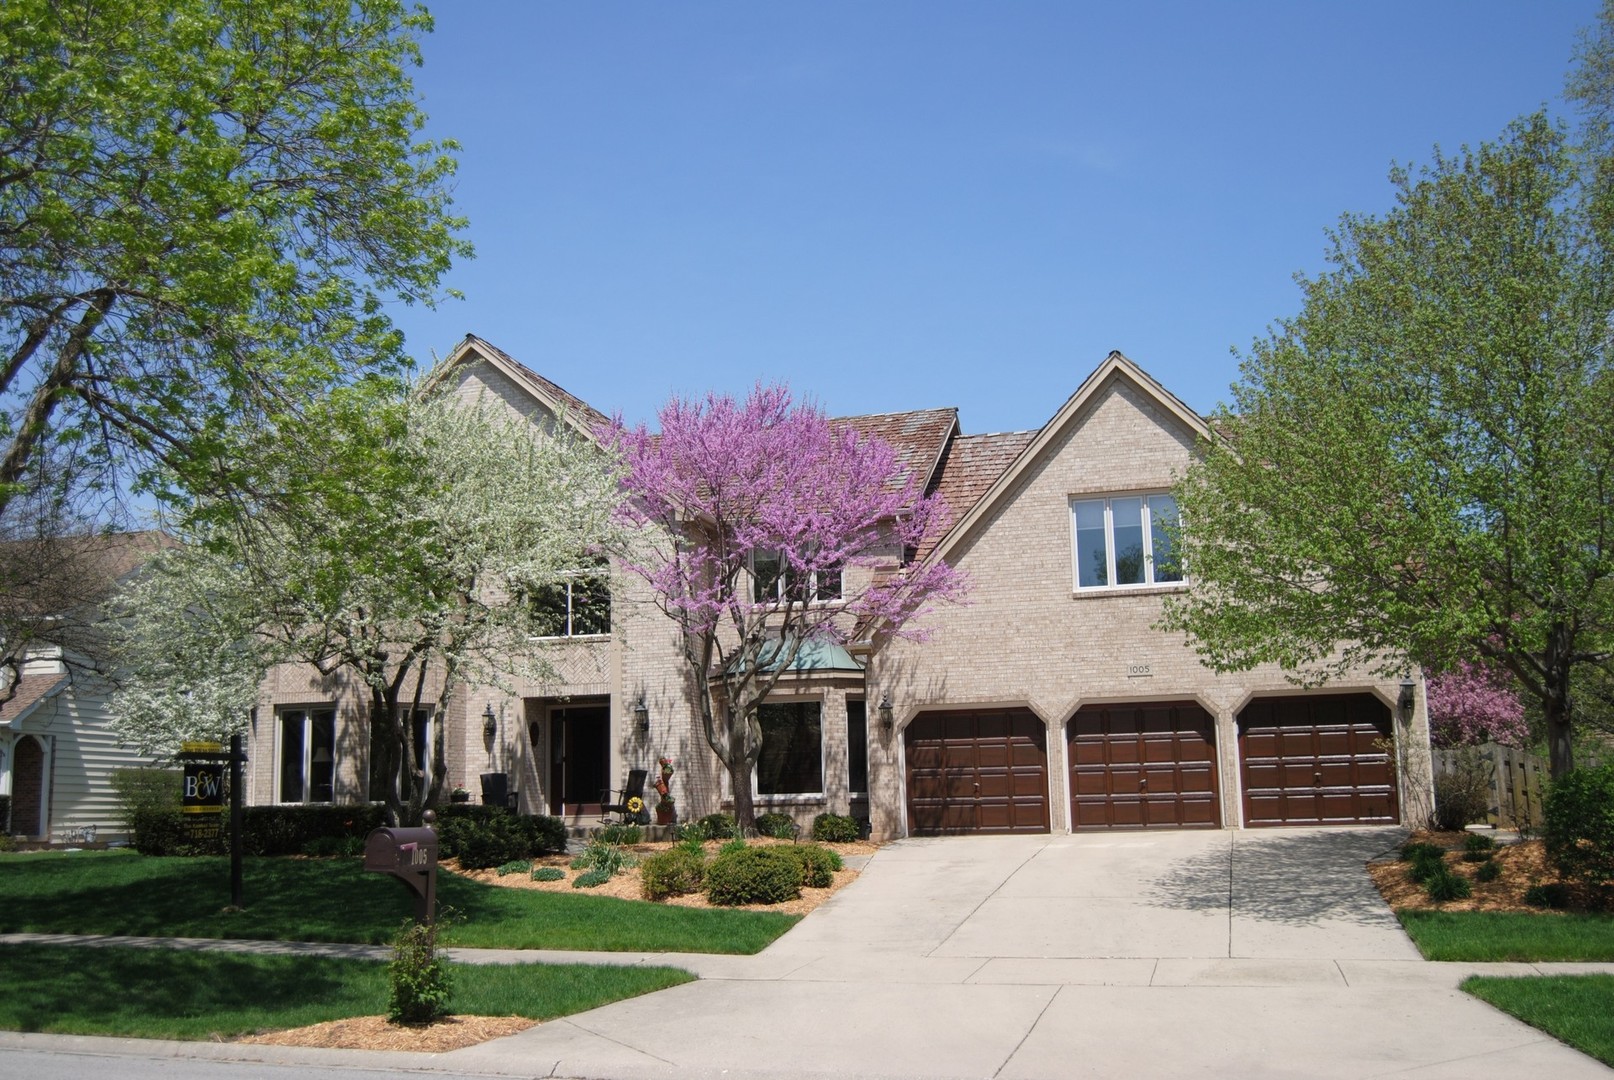 Naperville IL Homes for Sale Naperville Real Estate Bowers Realty Group